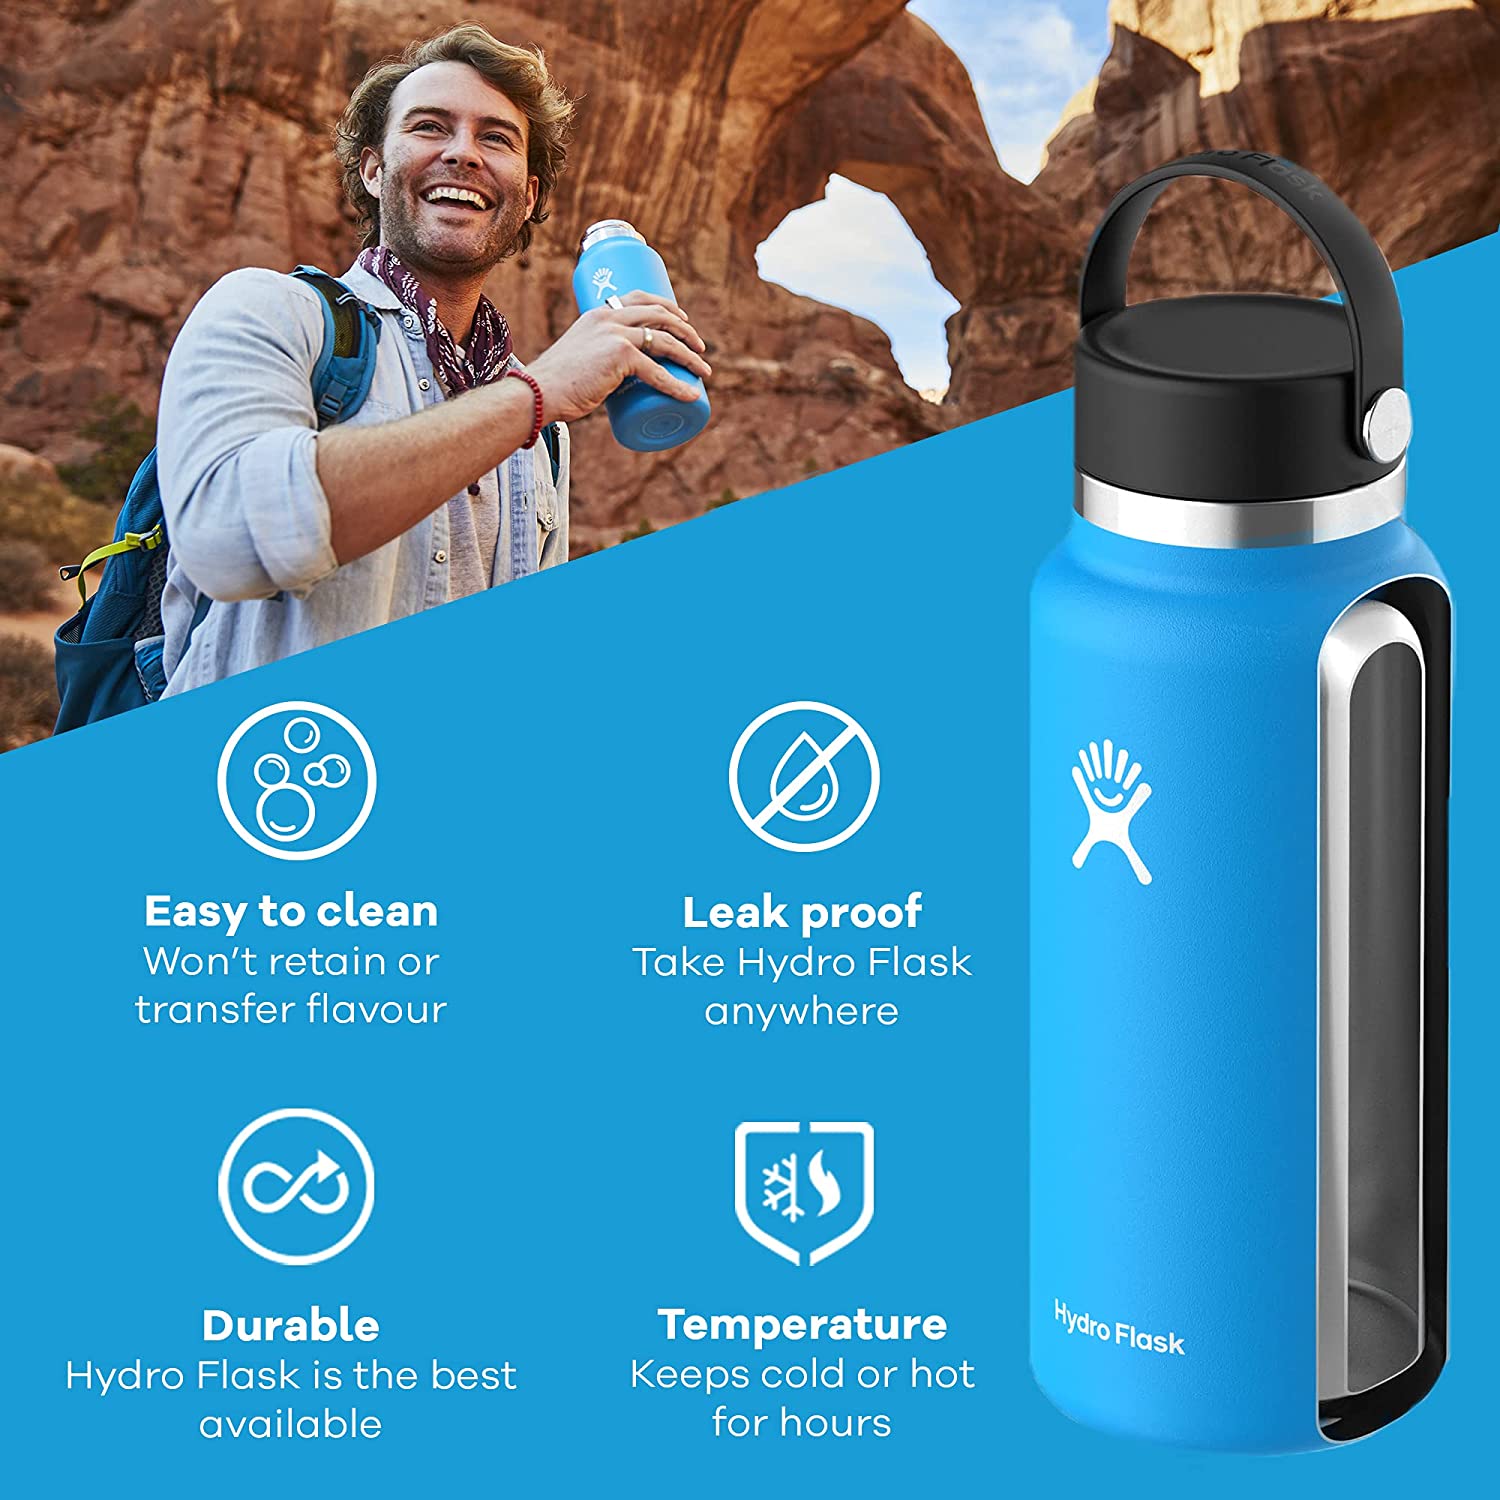 Is The Hydro Flask Lunch Box Water Tight? 